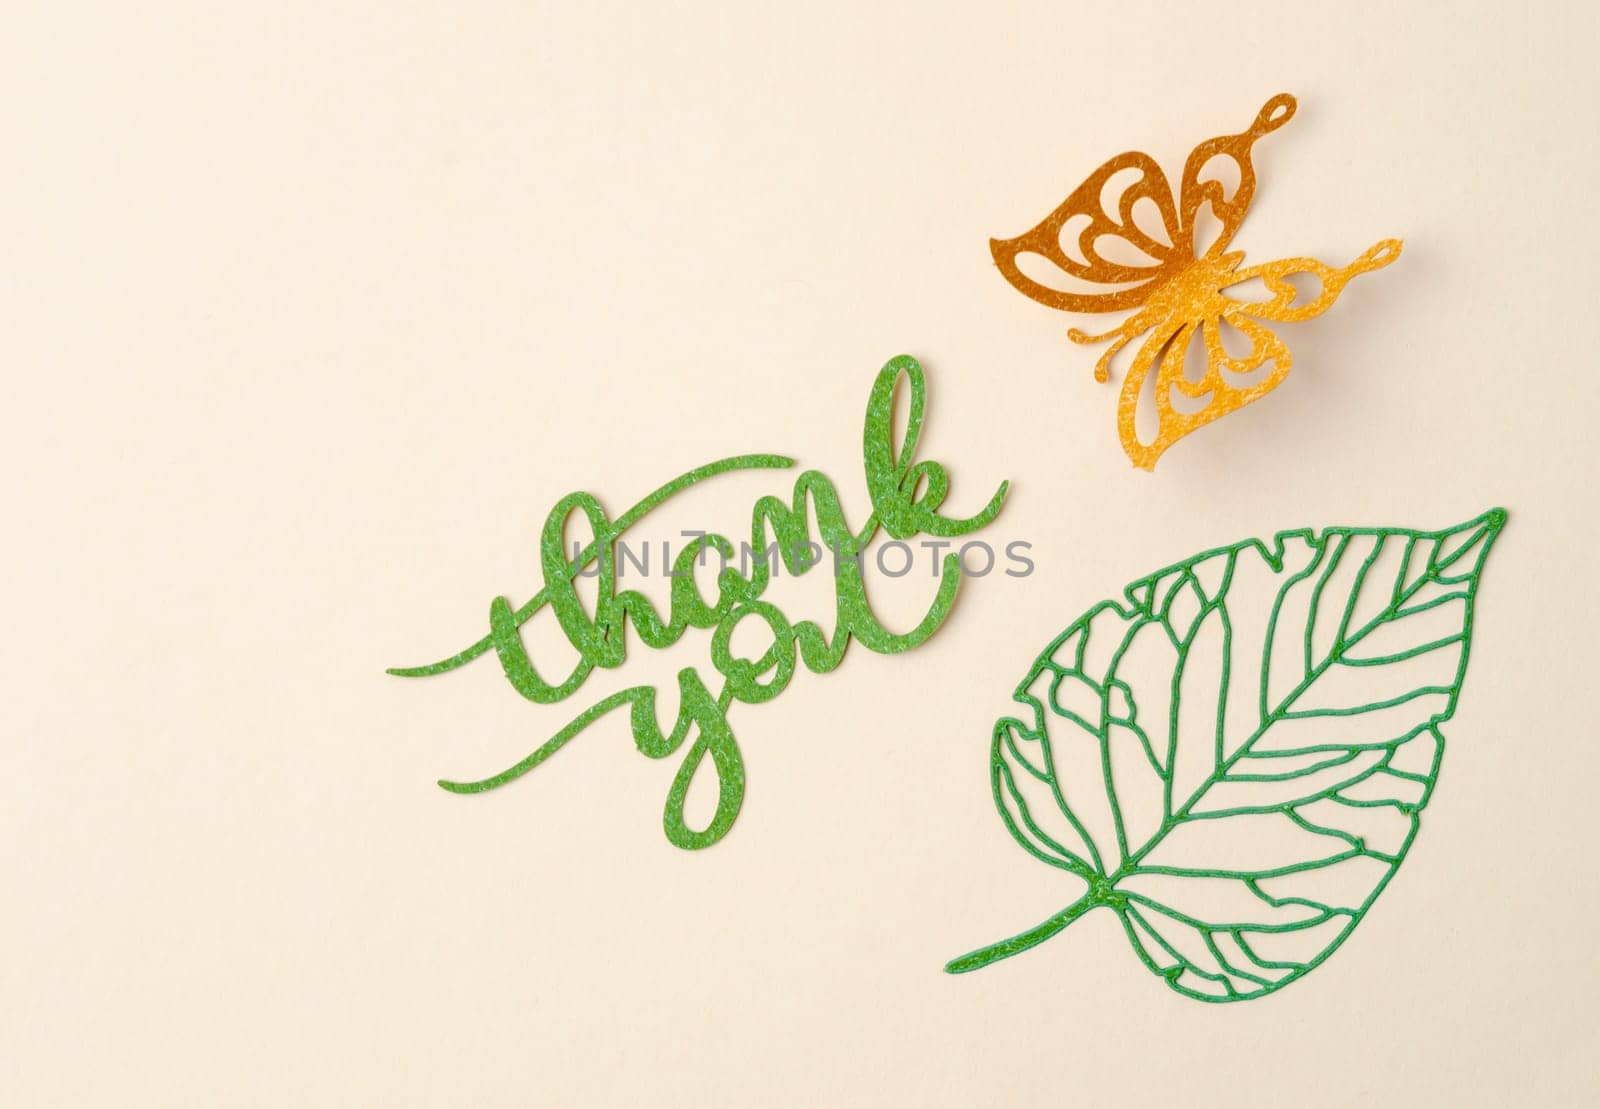 Thank you text with butterfly paper carve on pastel background.